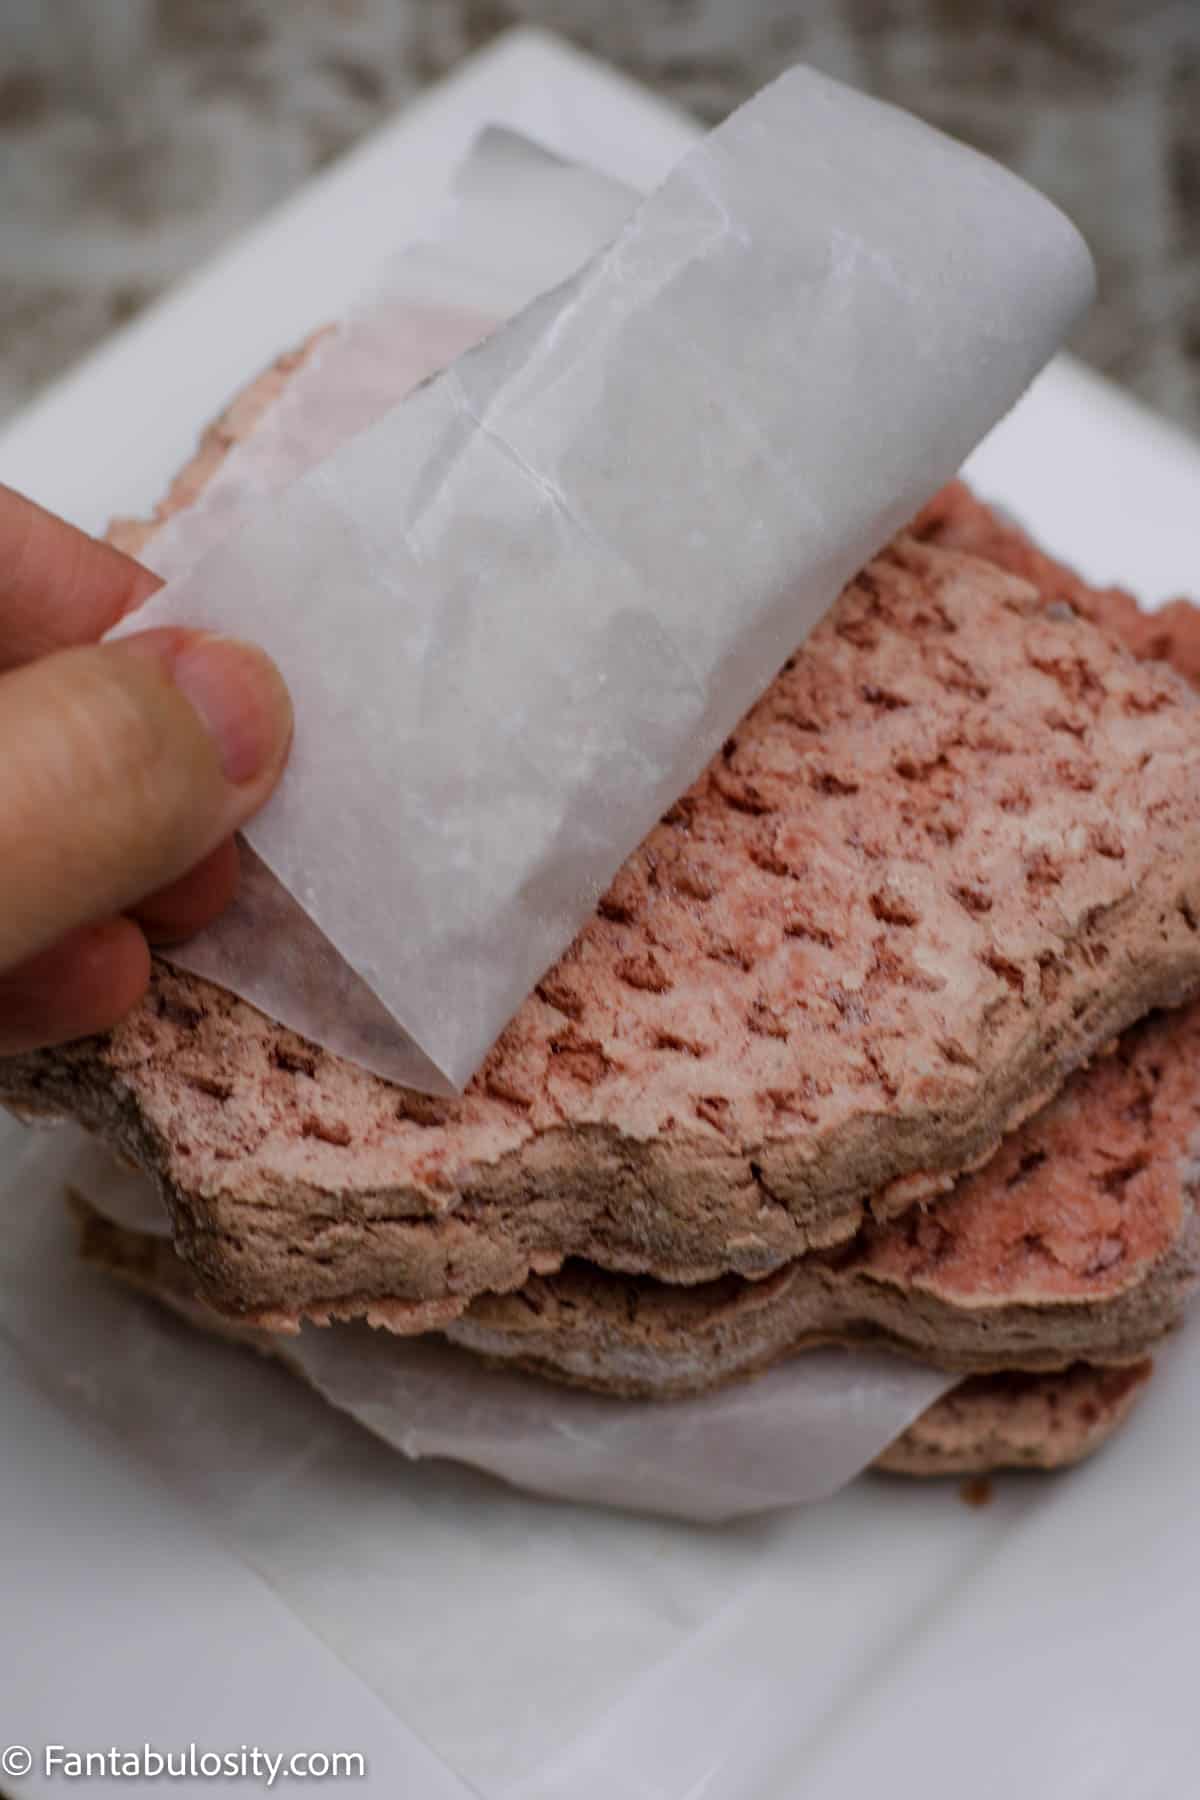 Remove the white paper from frozen burger patties